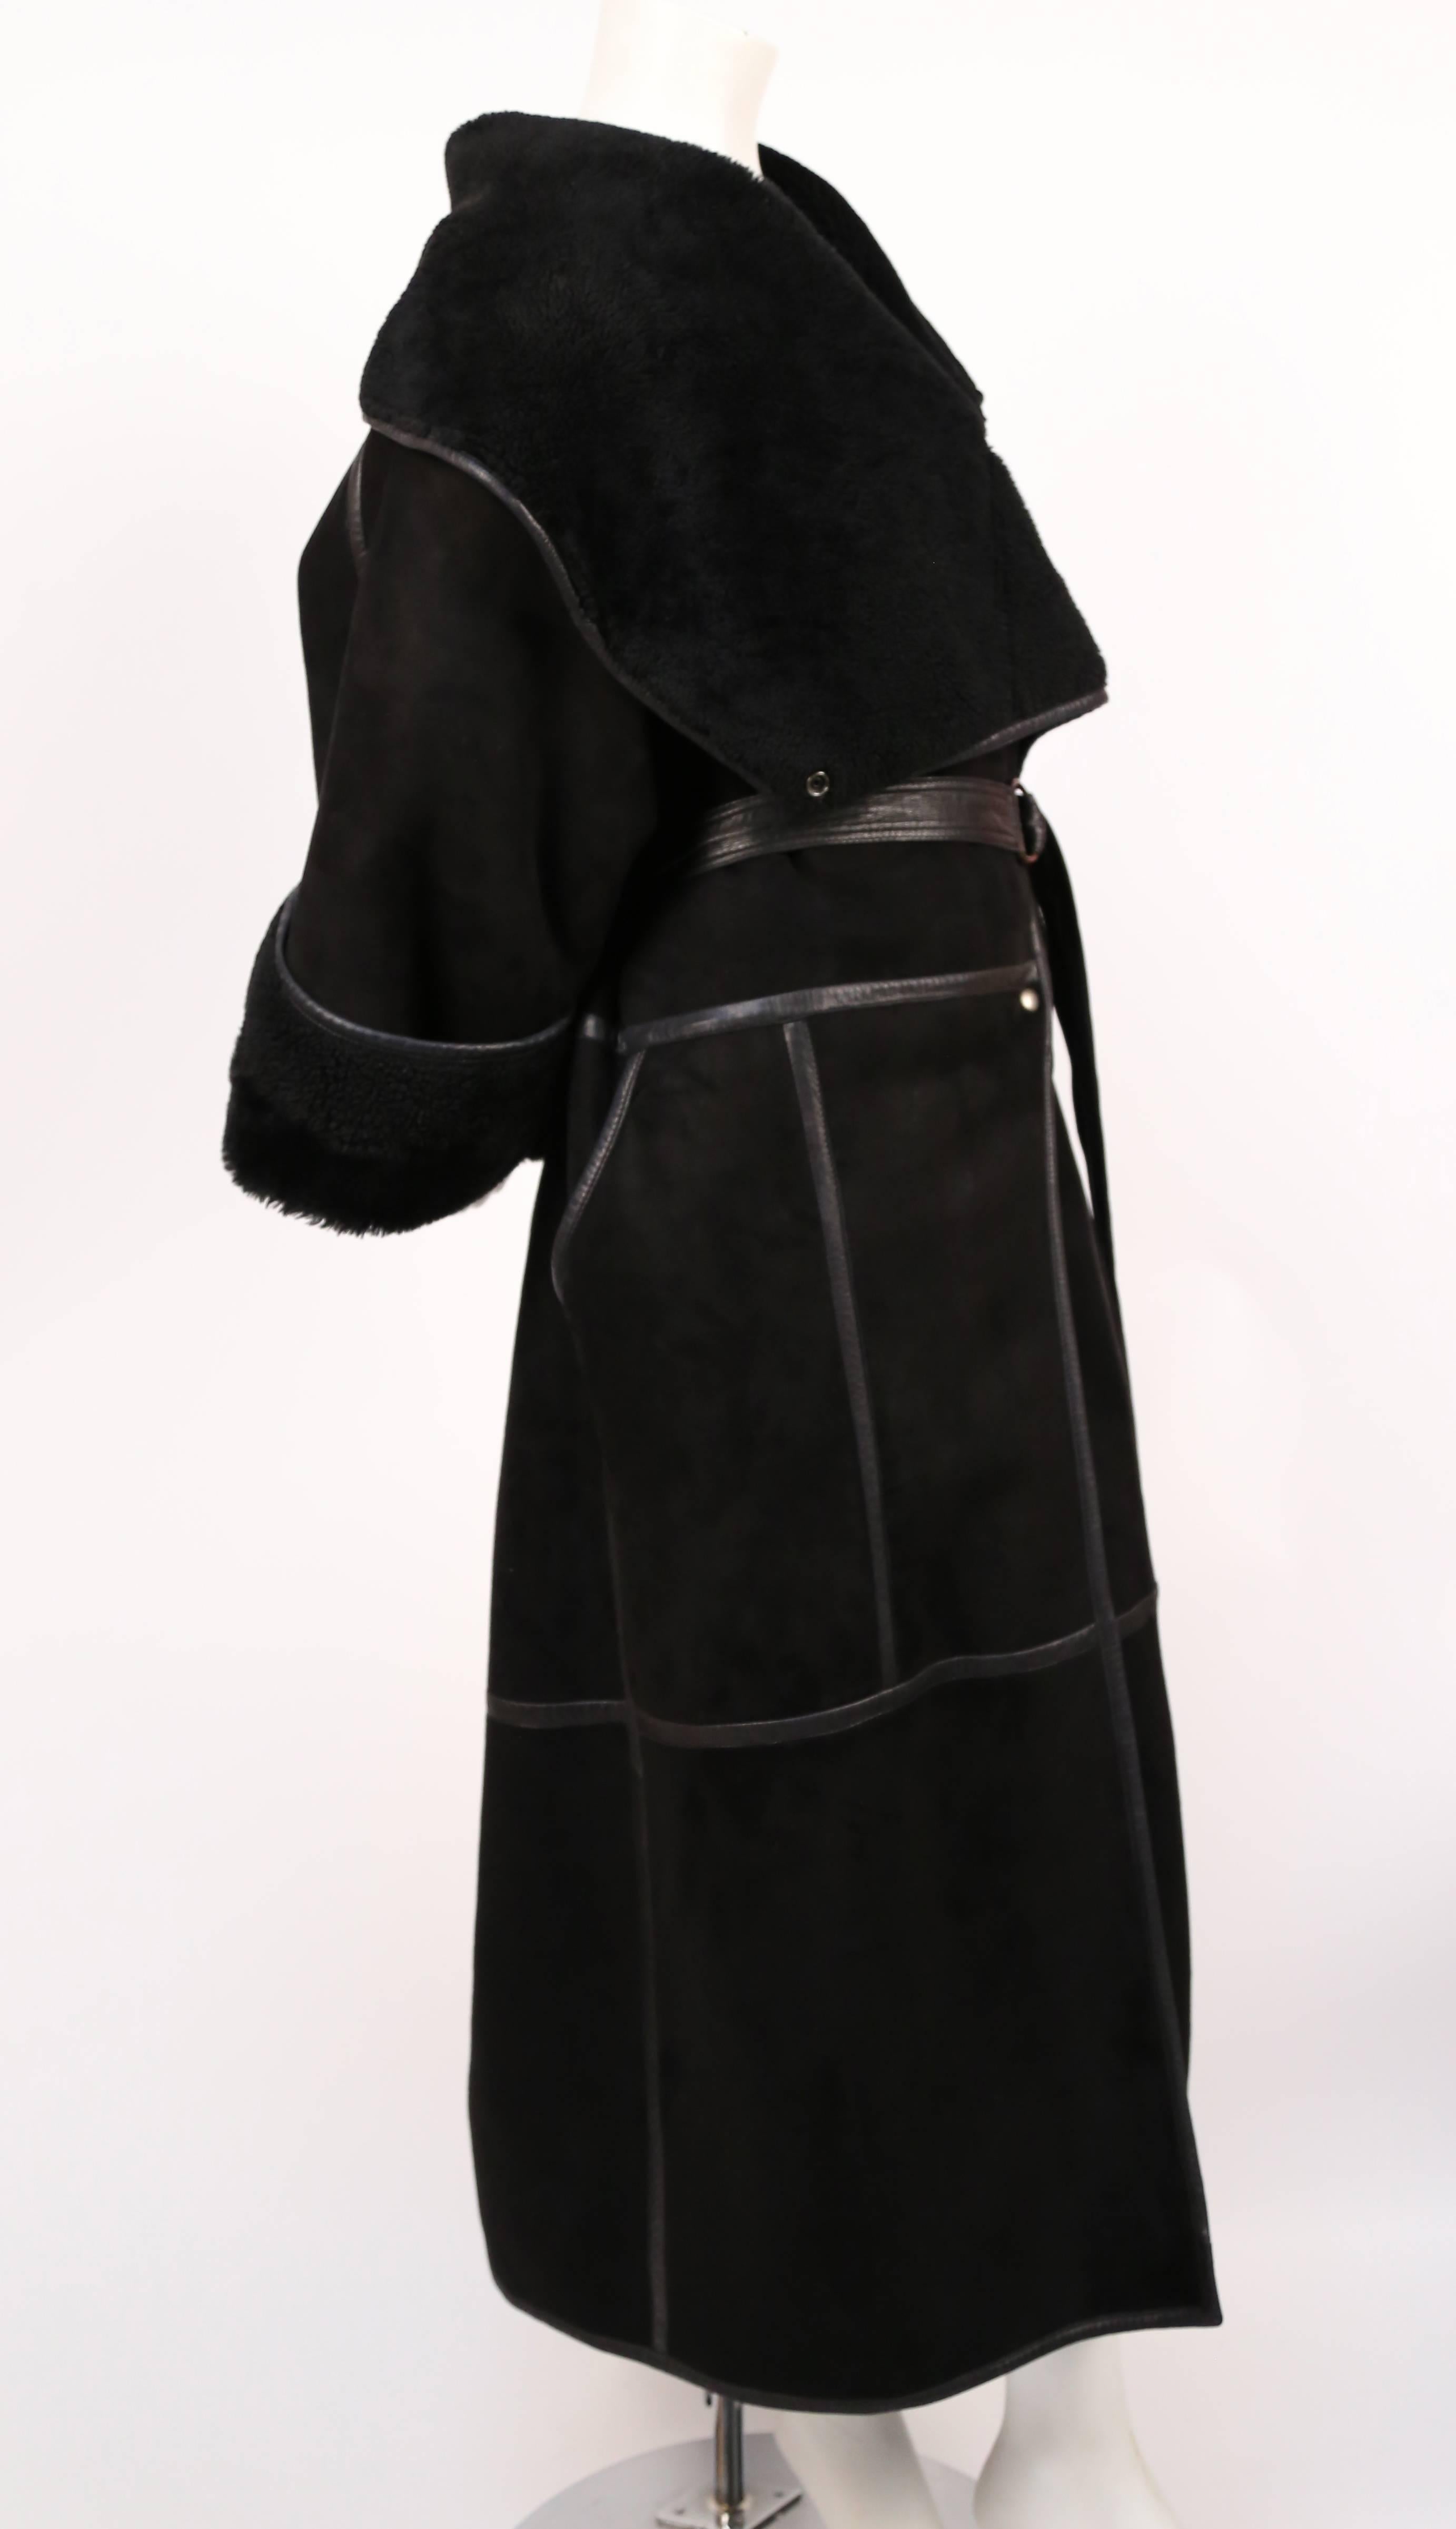 Very rare draped black shearling coat with leather trim by Anne Marie Beretta dating to the 1980's. Labeled a French size 38 however the coat has an oversized draped fit so it can fit a size or two larger depending on desired fit. Snap closure with